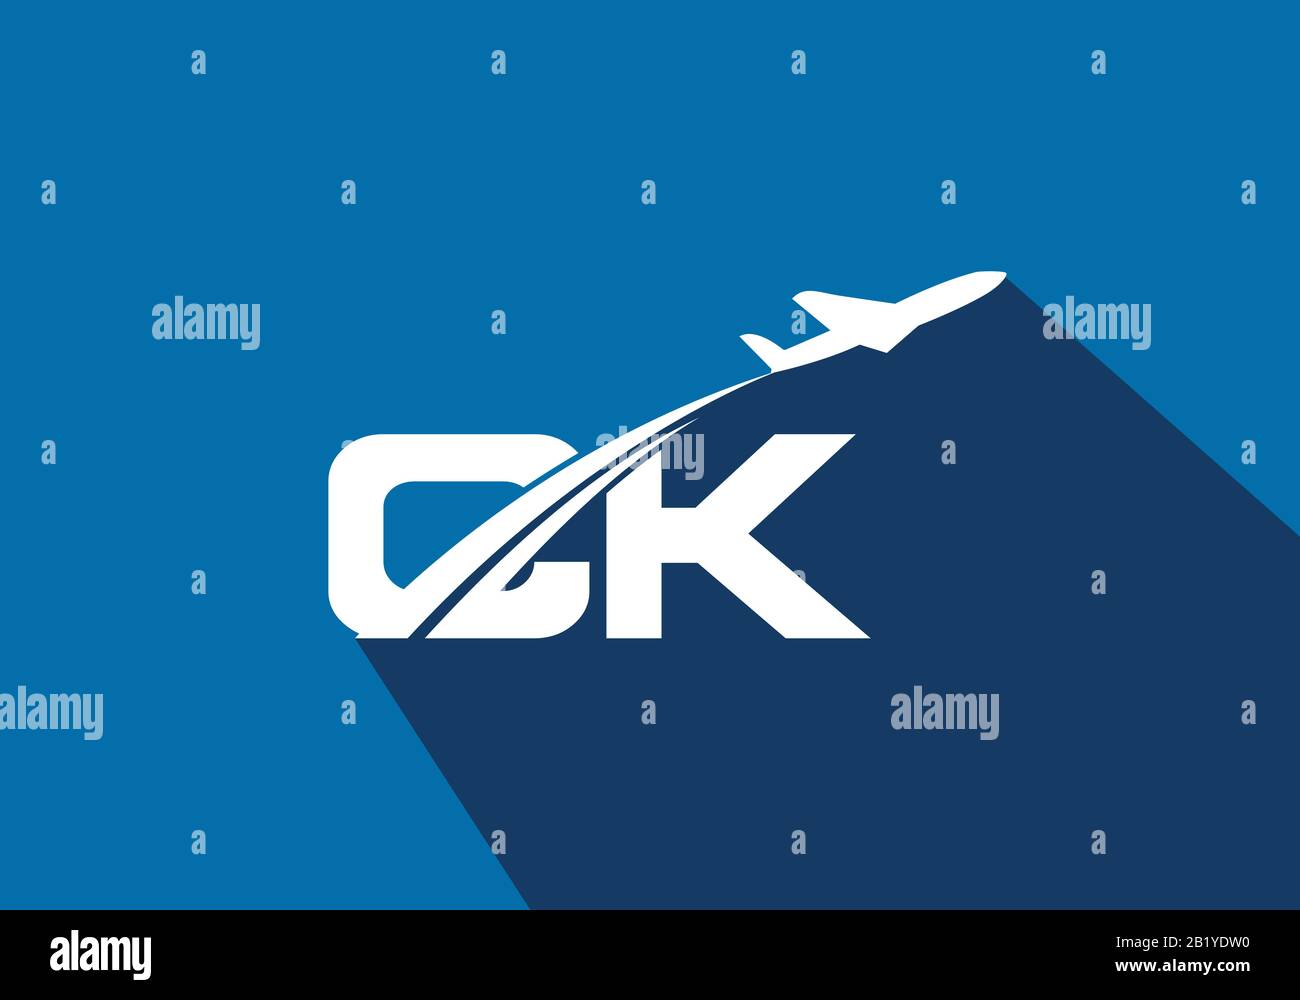 Initial Letter C and K  with Aviation Logo Design, Air, Airline, Airplane and Travel Logo template. Stock Vector